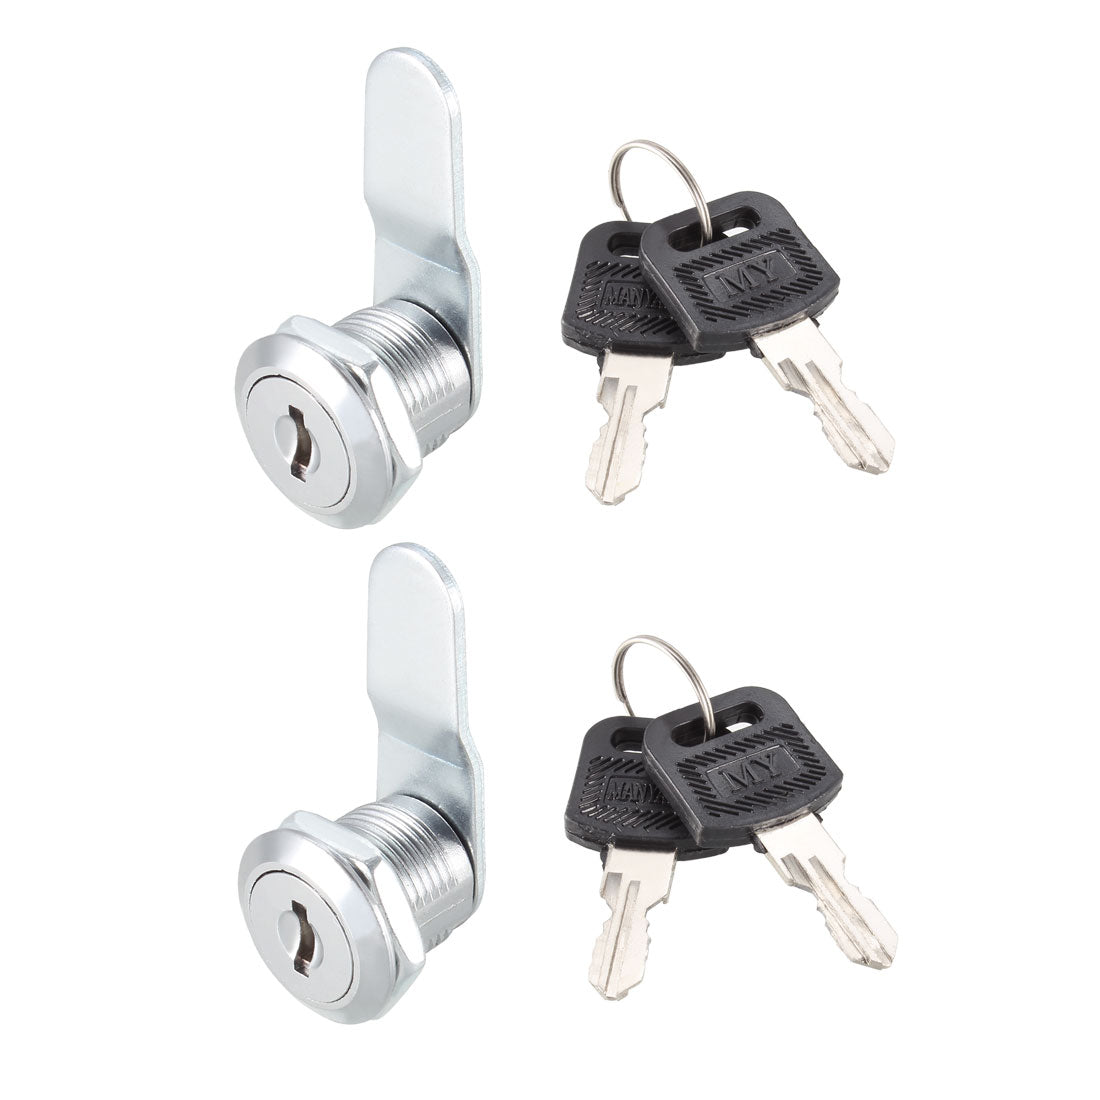 Uxcell Uxcell Cam Lock 20mm Cylinder Length Fit on Max 1/2-inch Panel Keyed Different 2Pcs